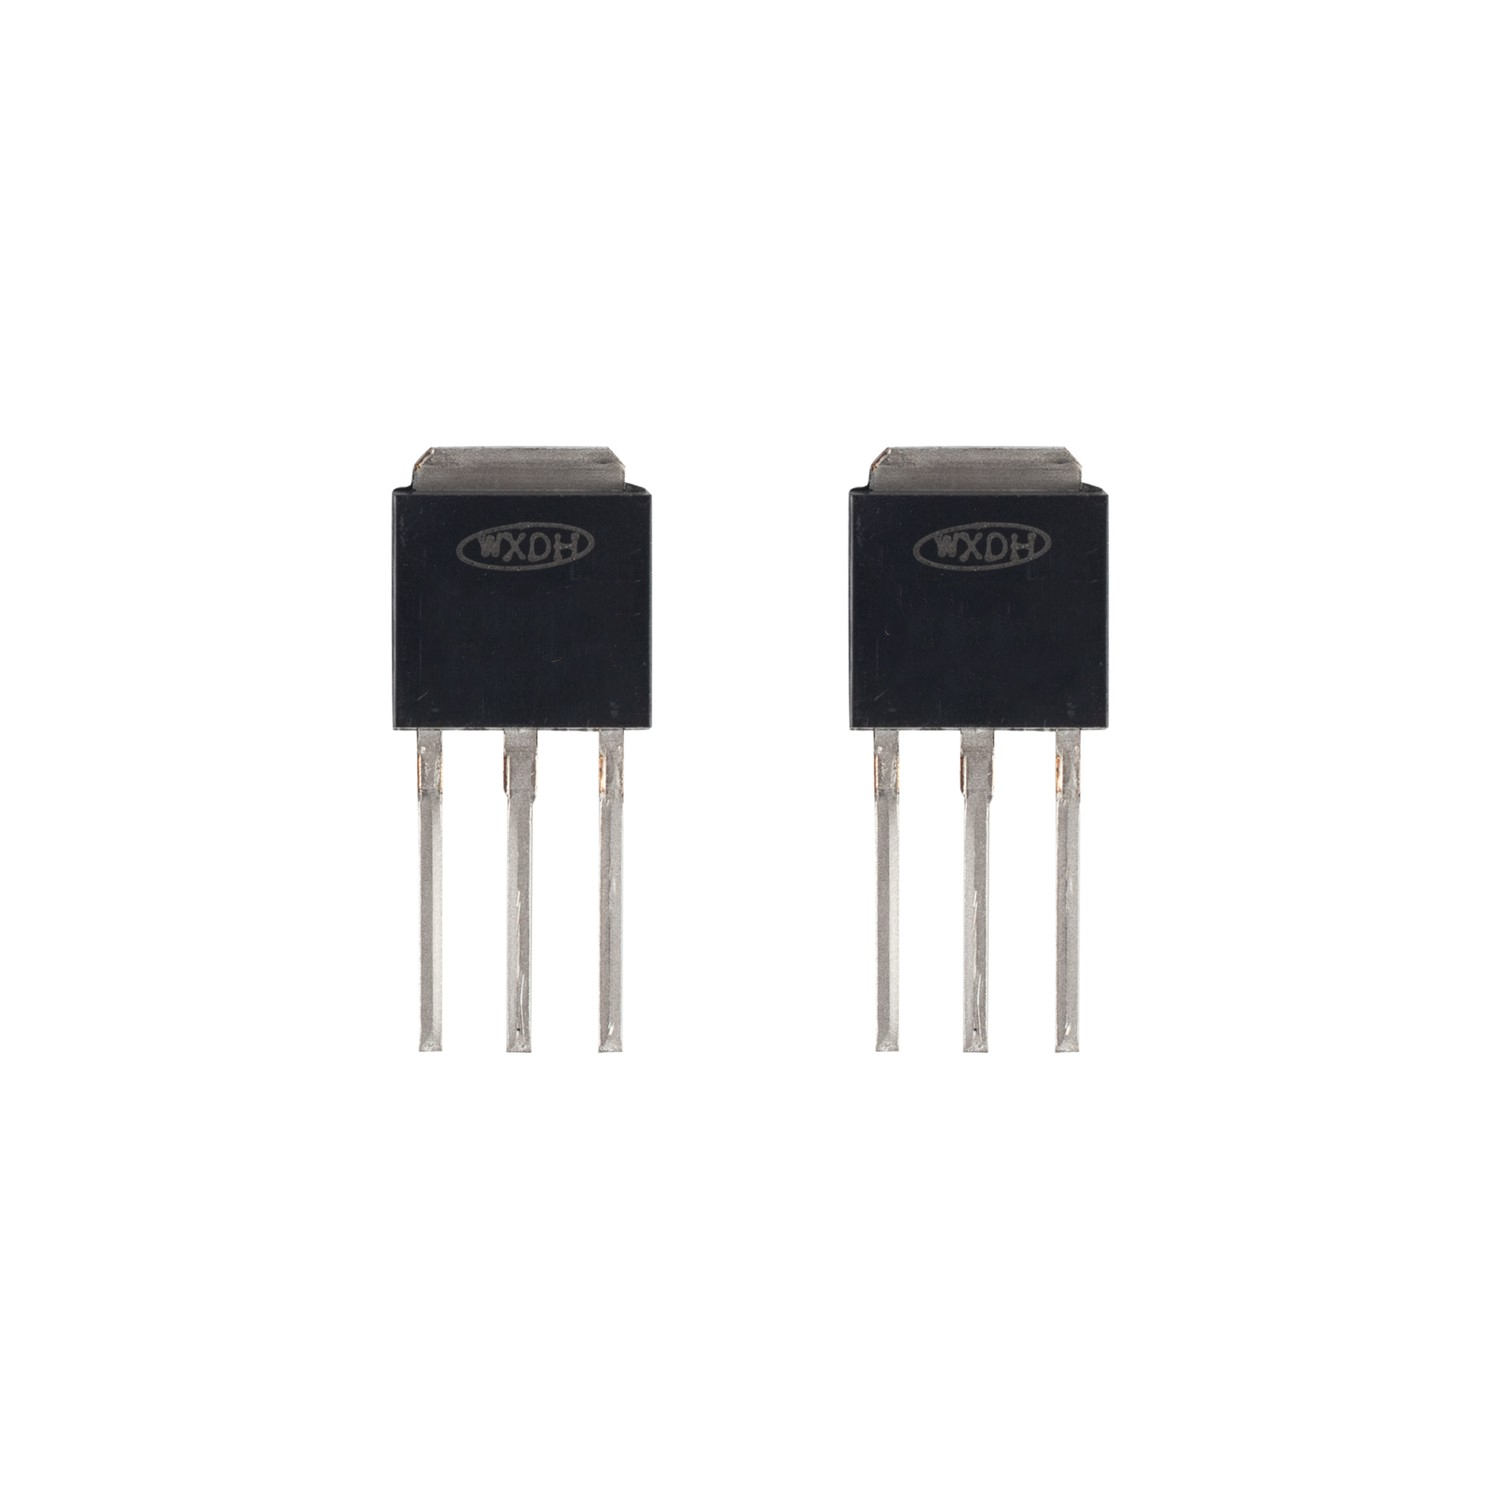 60A 20V N-channel Enhancement Mode Power MOSFET